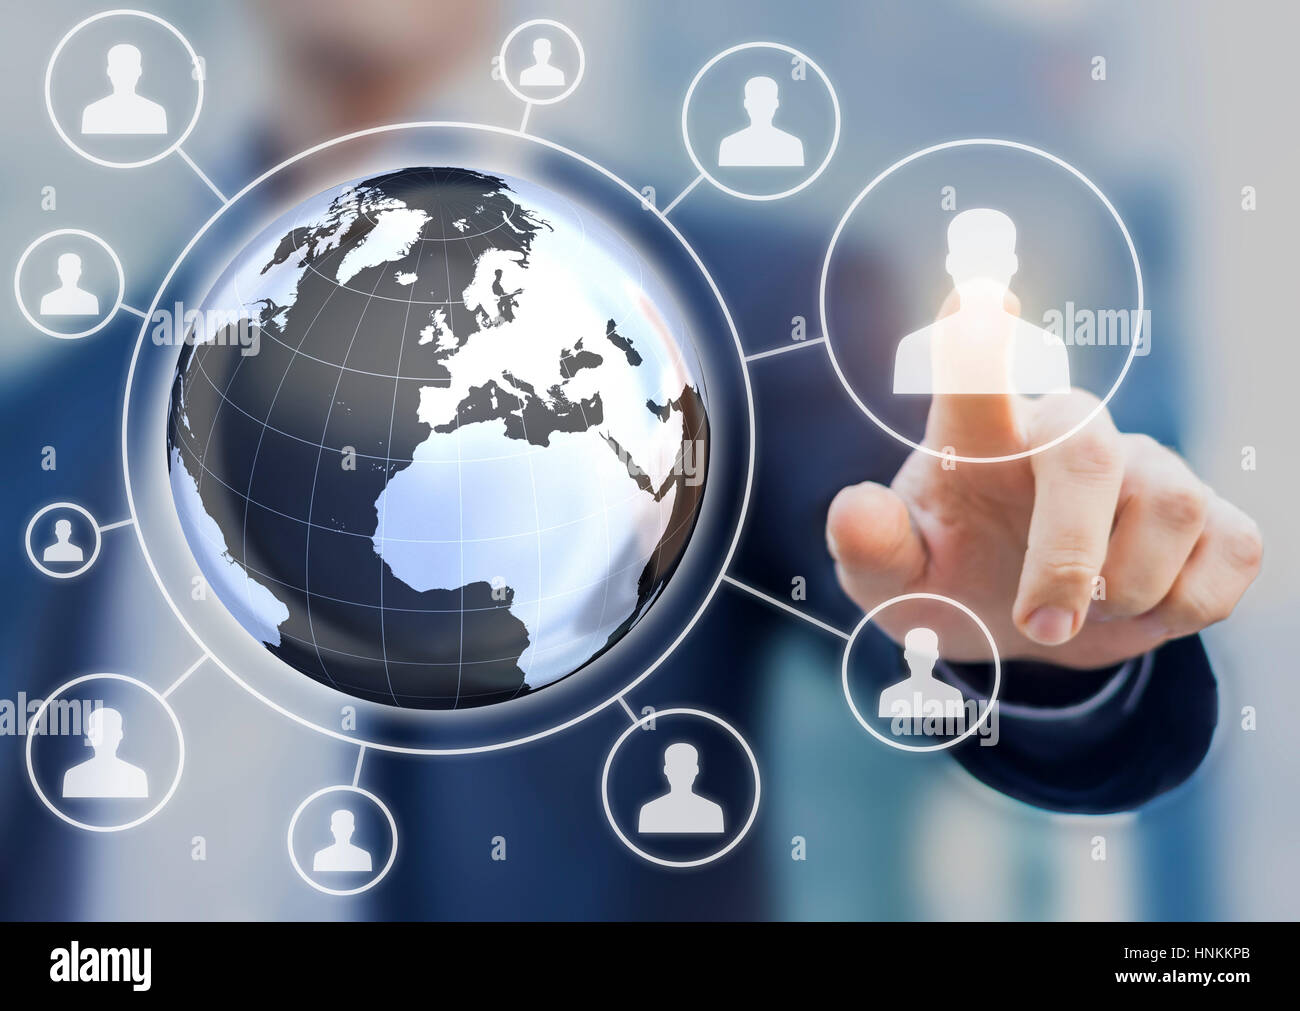 Multi-national human resources (HR) management concept with 3d earth globe map and manager selecting a candidate profile on a virtual screen Stock Photo